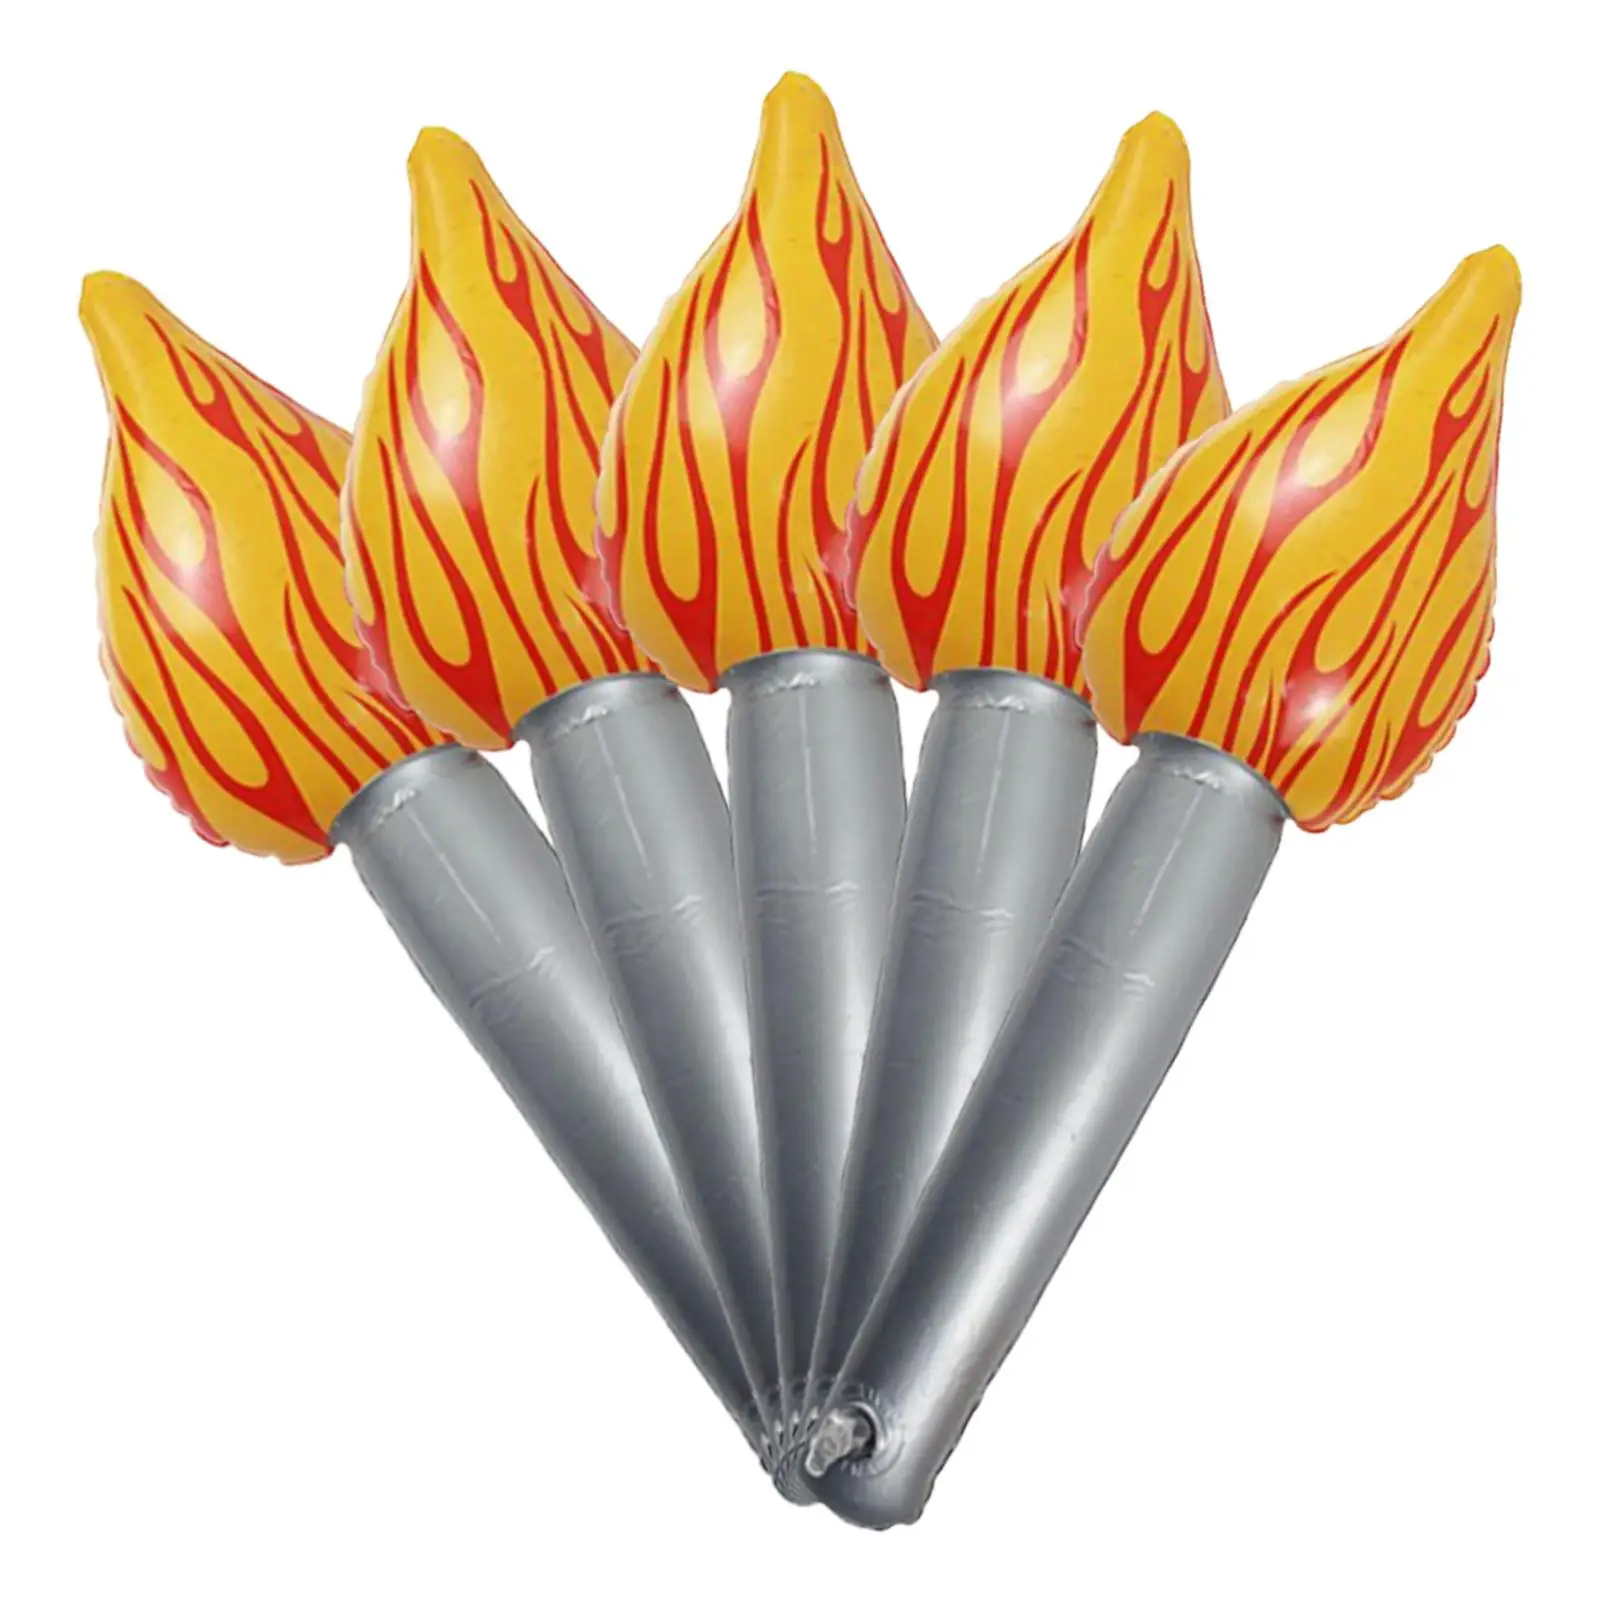 5x Inflatable Flame Toy PVC Balloons 15inch Fun Torch Balloon for Party Favors Birthday Cosplay Sports Decoration